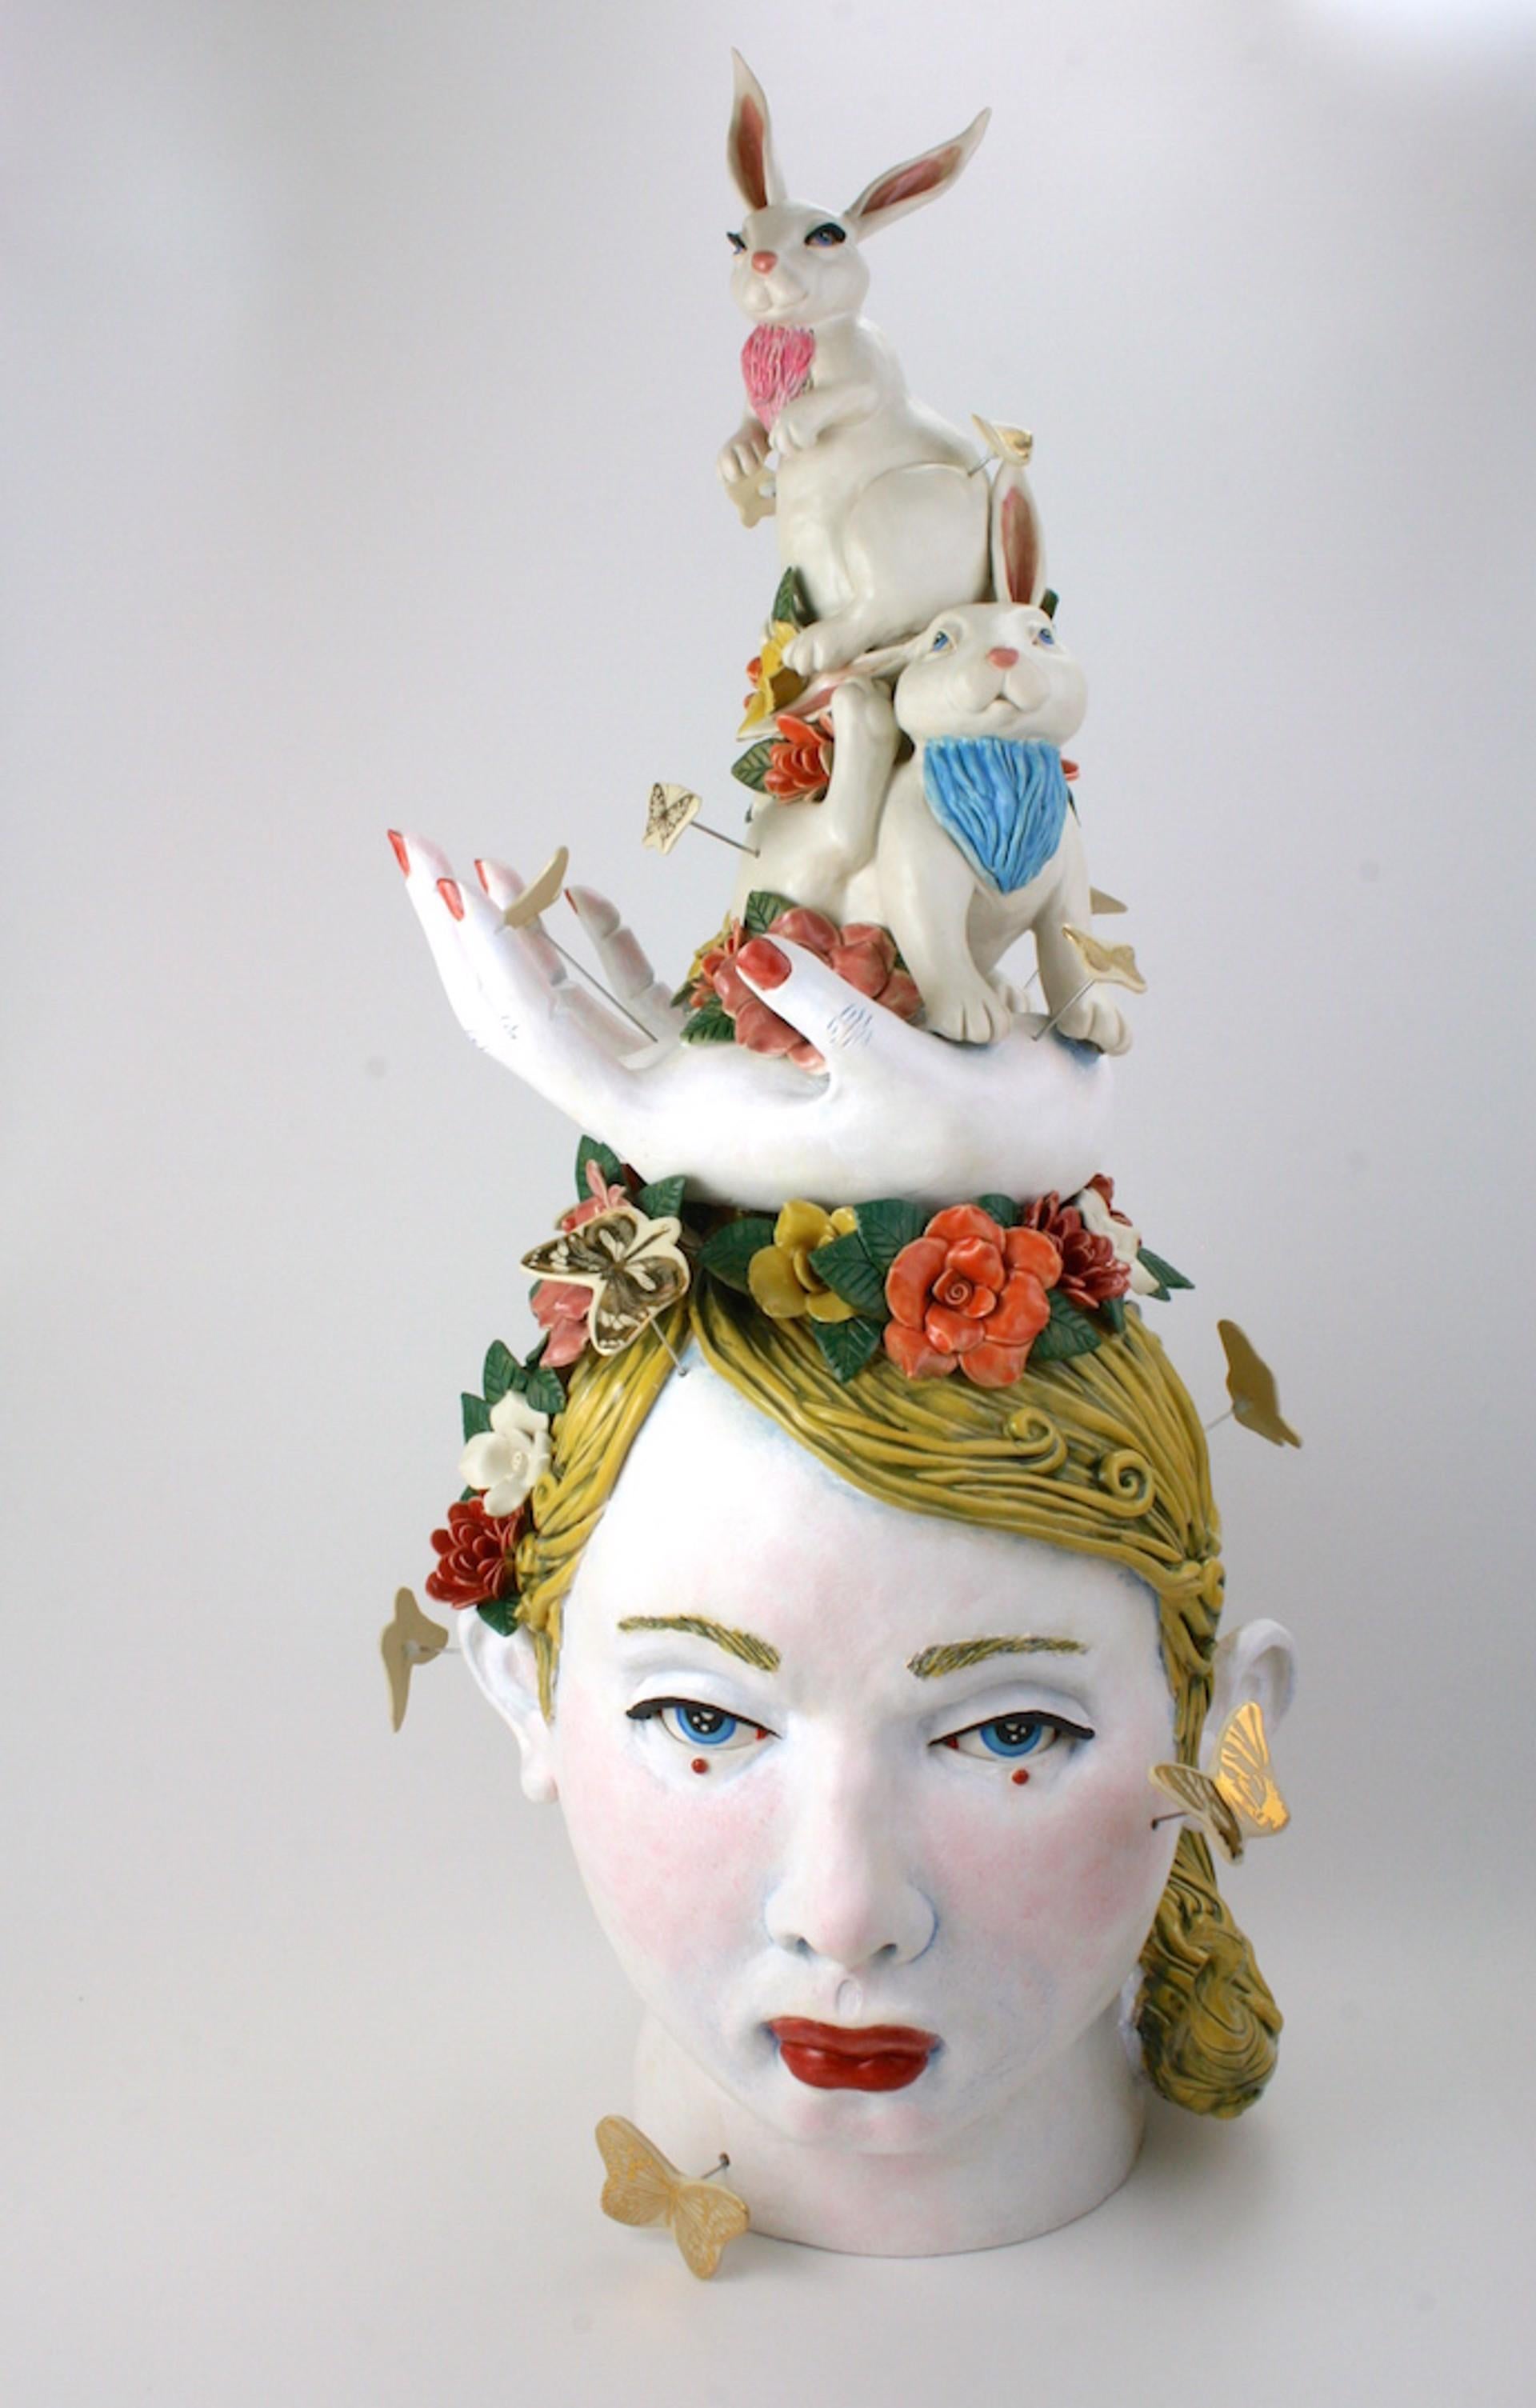 Taylor Robenalt Figurative Sculpture - THE FUTURE IS BRIGHT - ceramic sculpture of woman with roses and rabbits